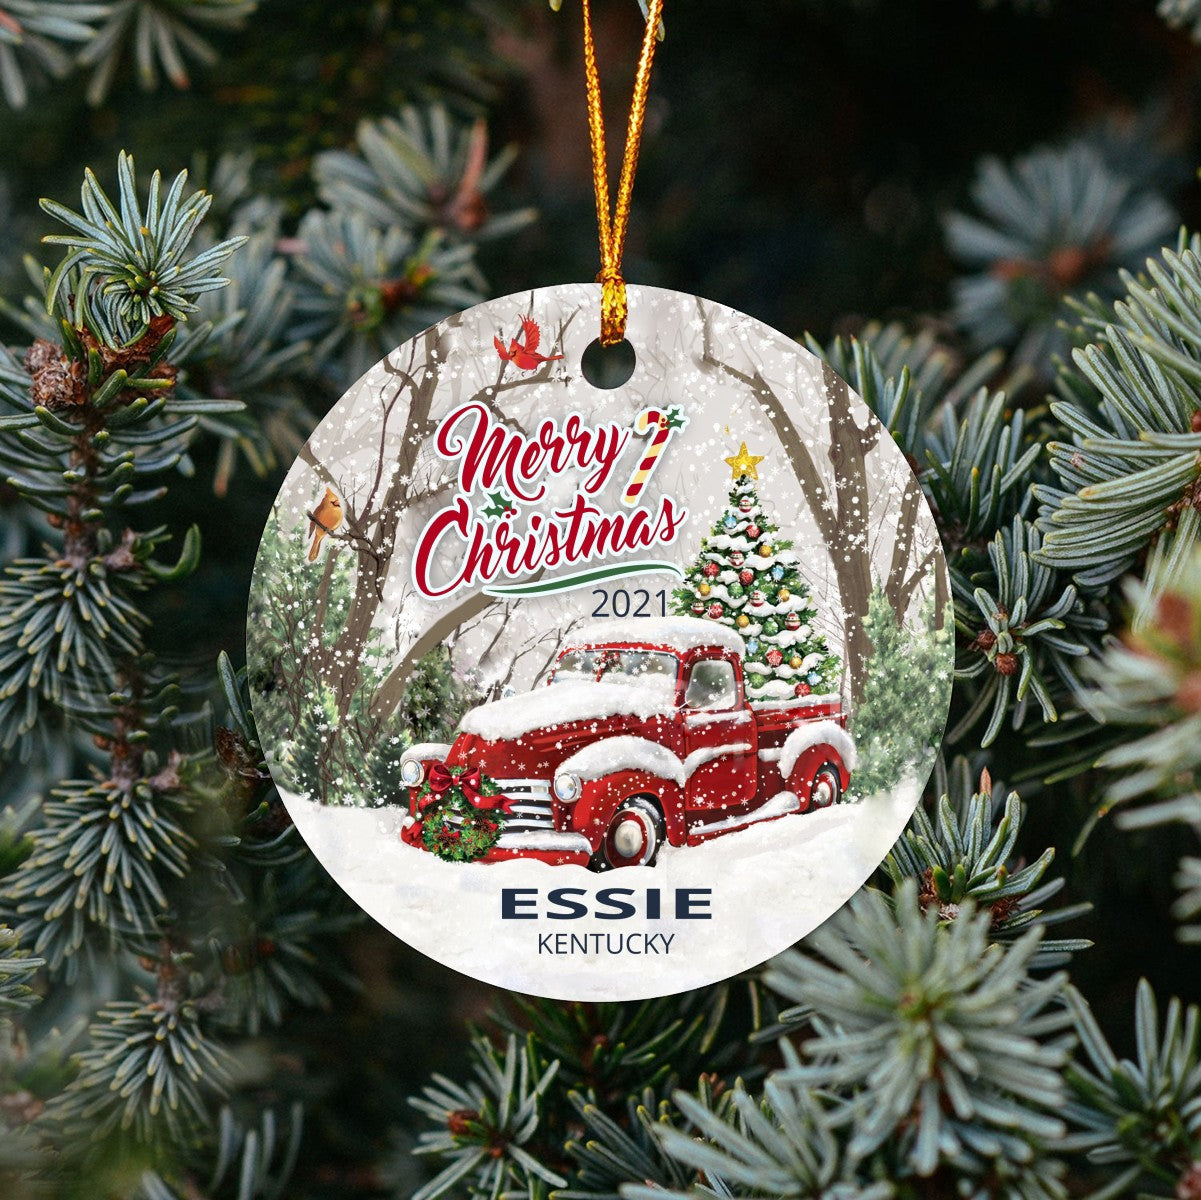 Christmas Tree Ornaments Essie - Ornament Customize With Name City And State Essie Kentucky KY - Red Truck Xmas Ornaments 3'' Plastic Gift For Family, Friend And Housewarming